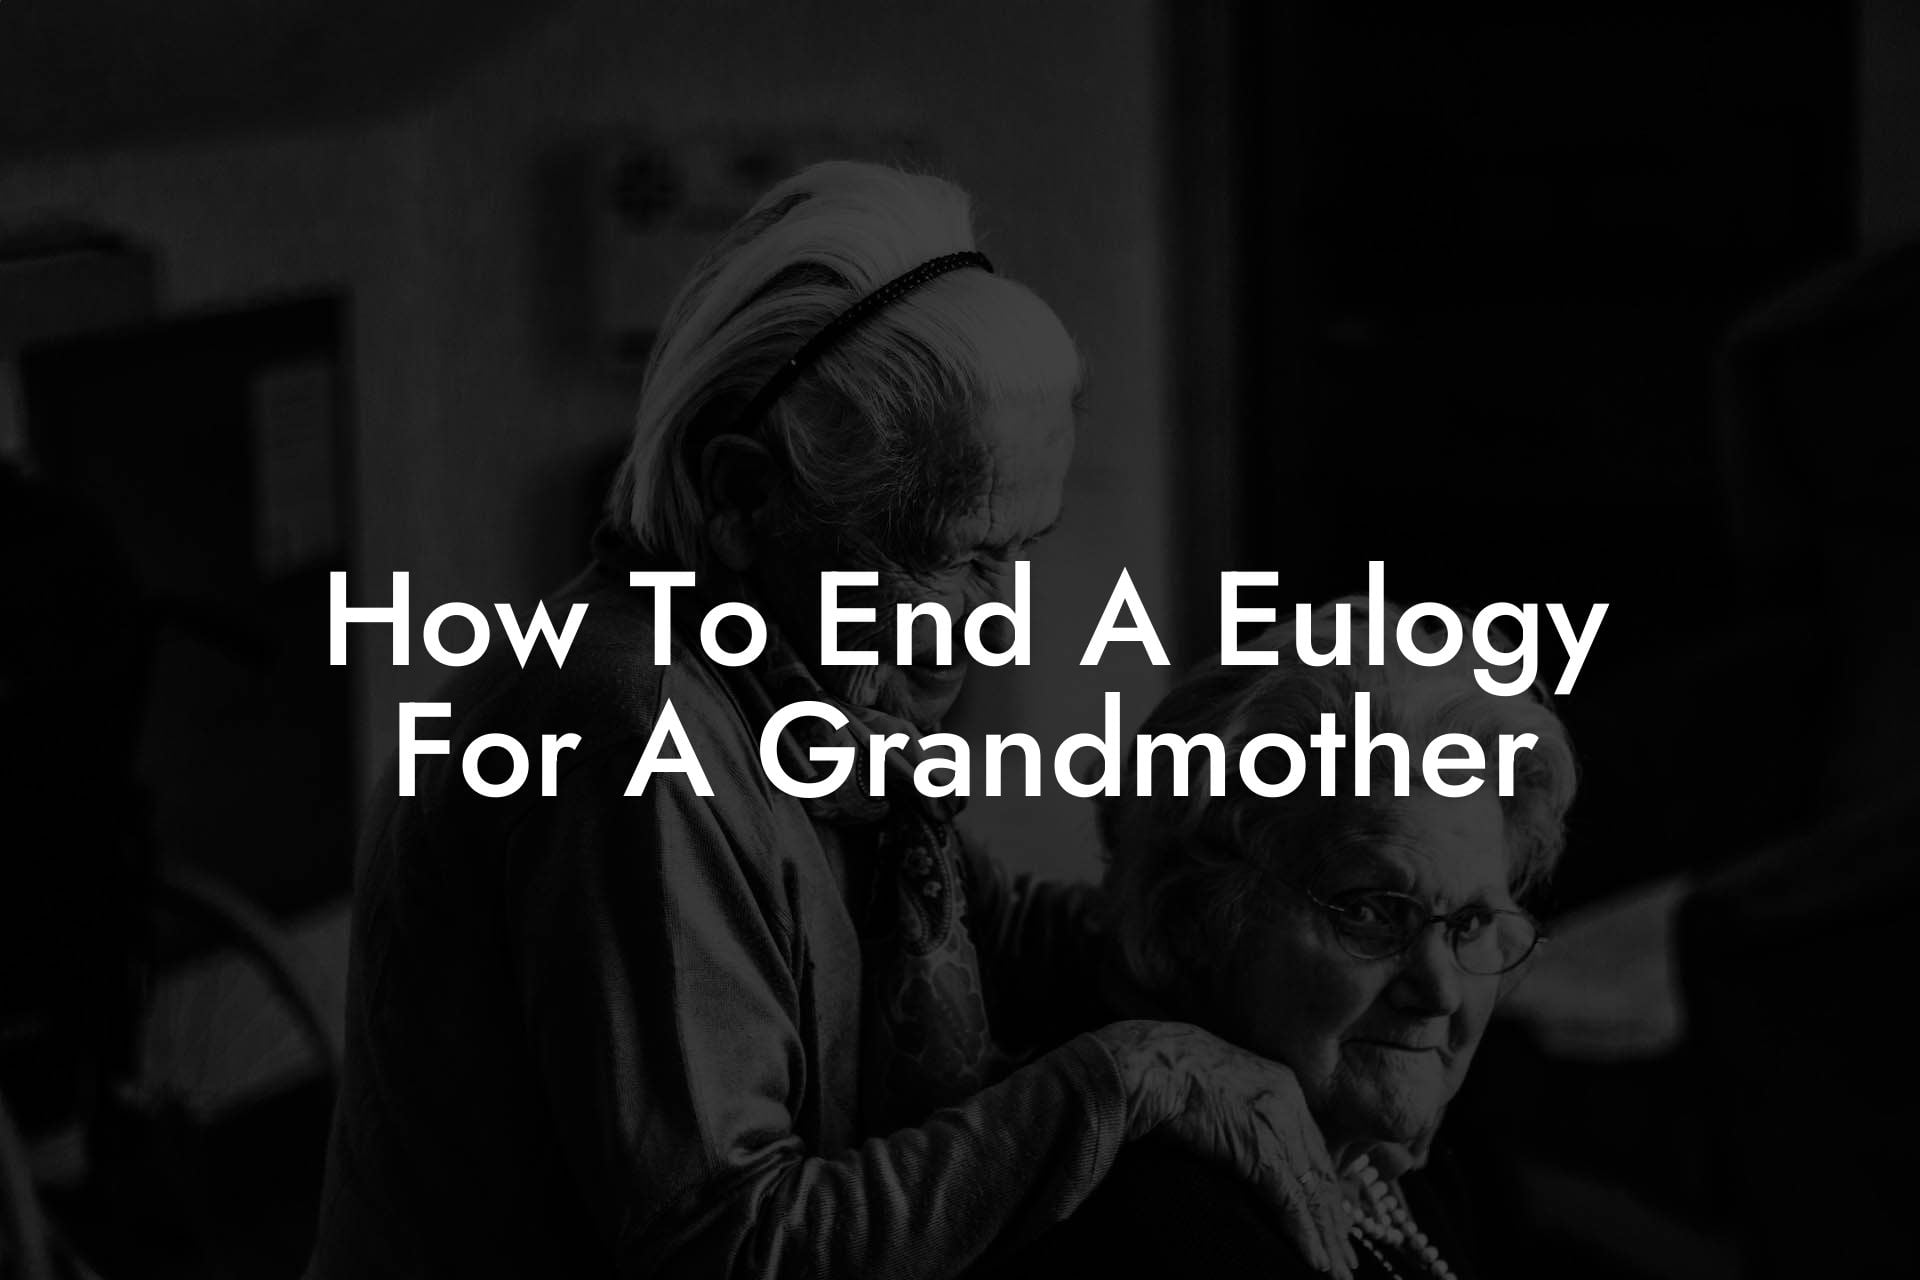 How To End A Eulogy For A Grandmother